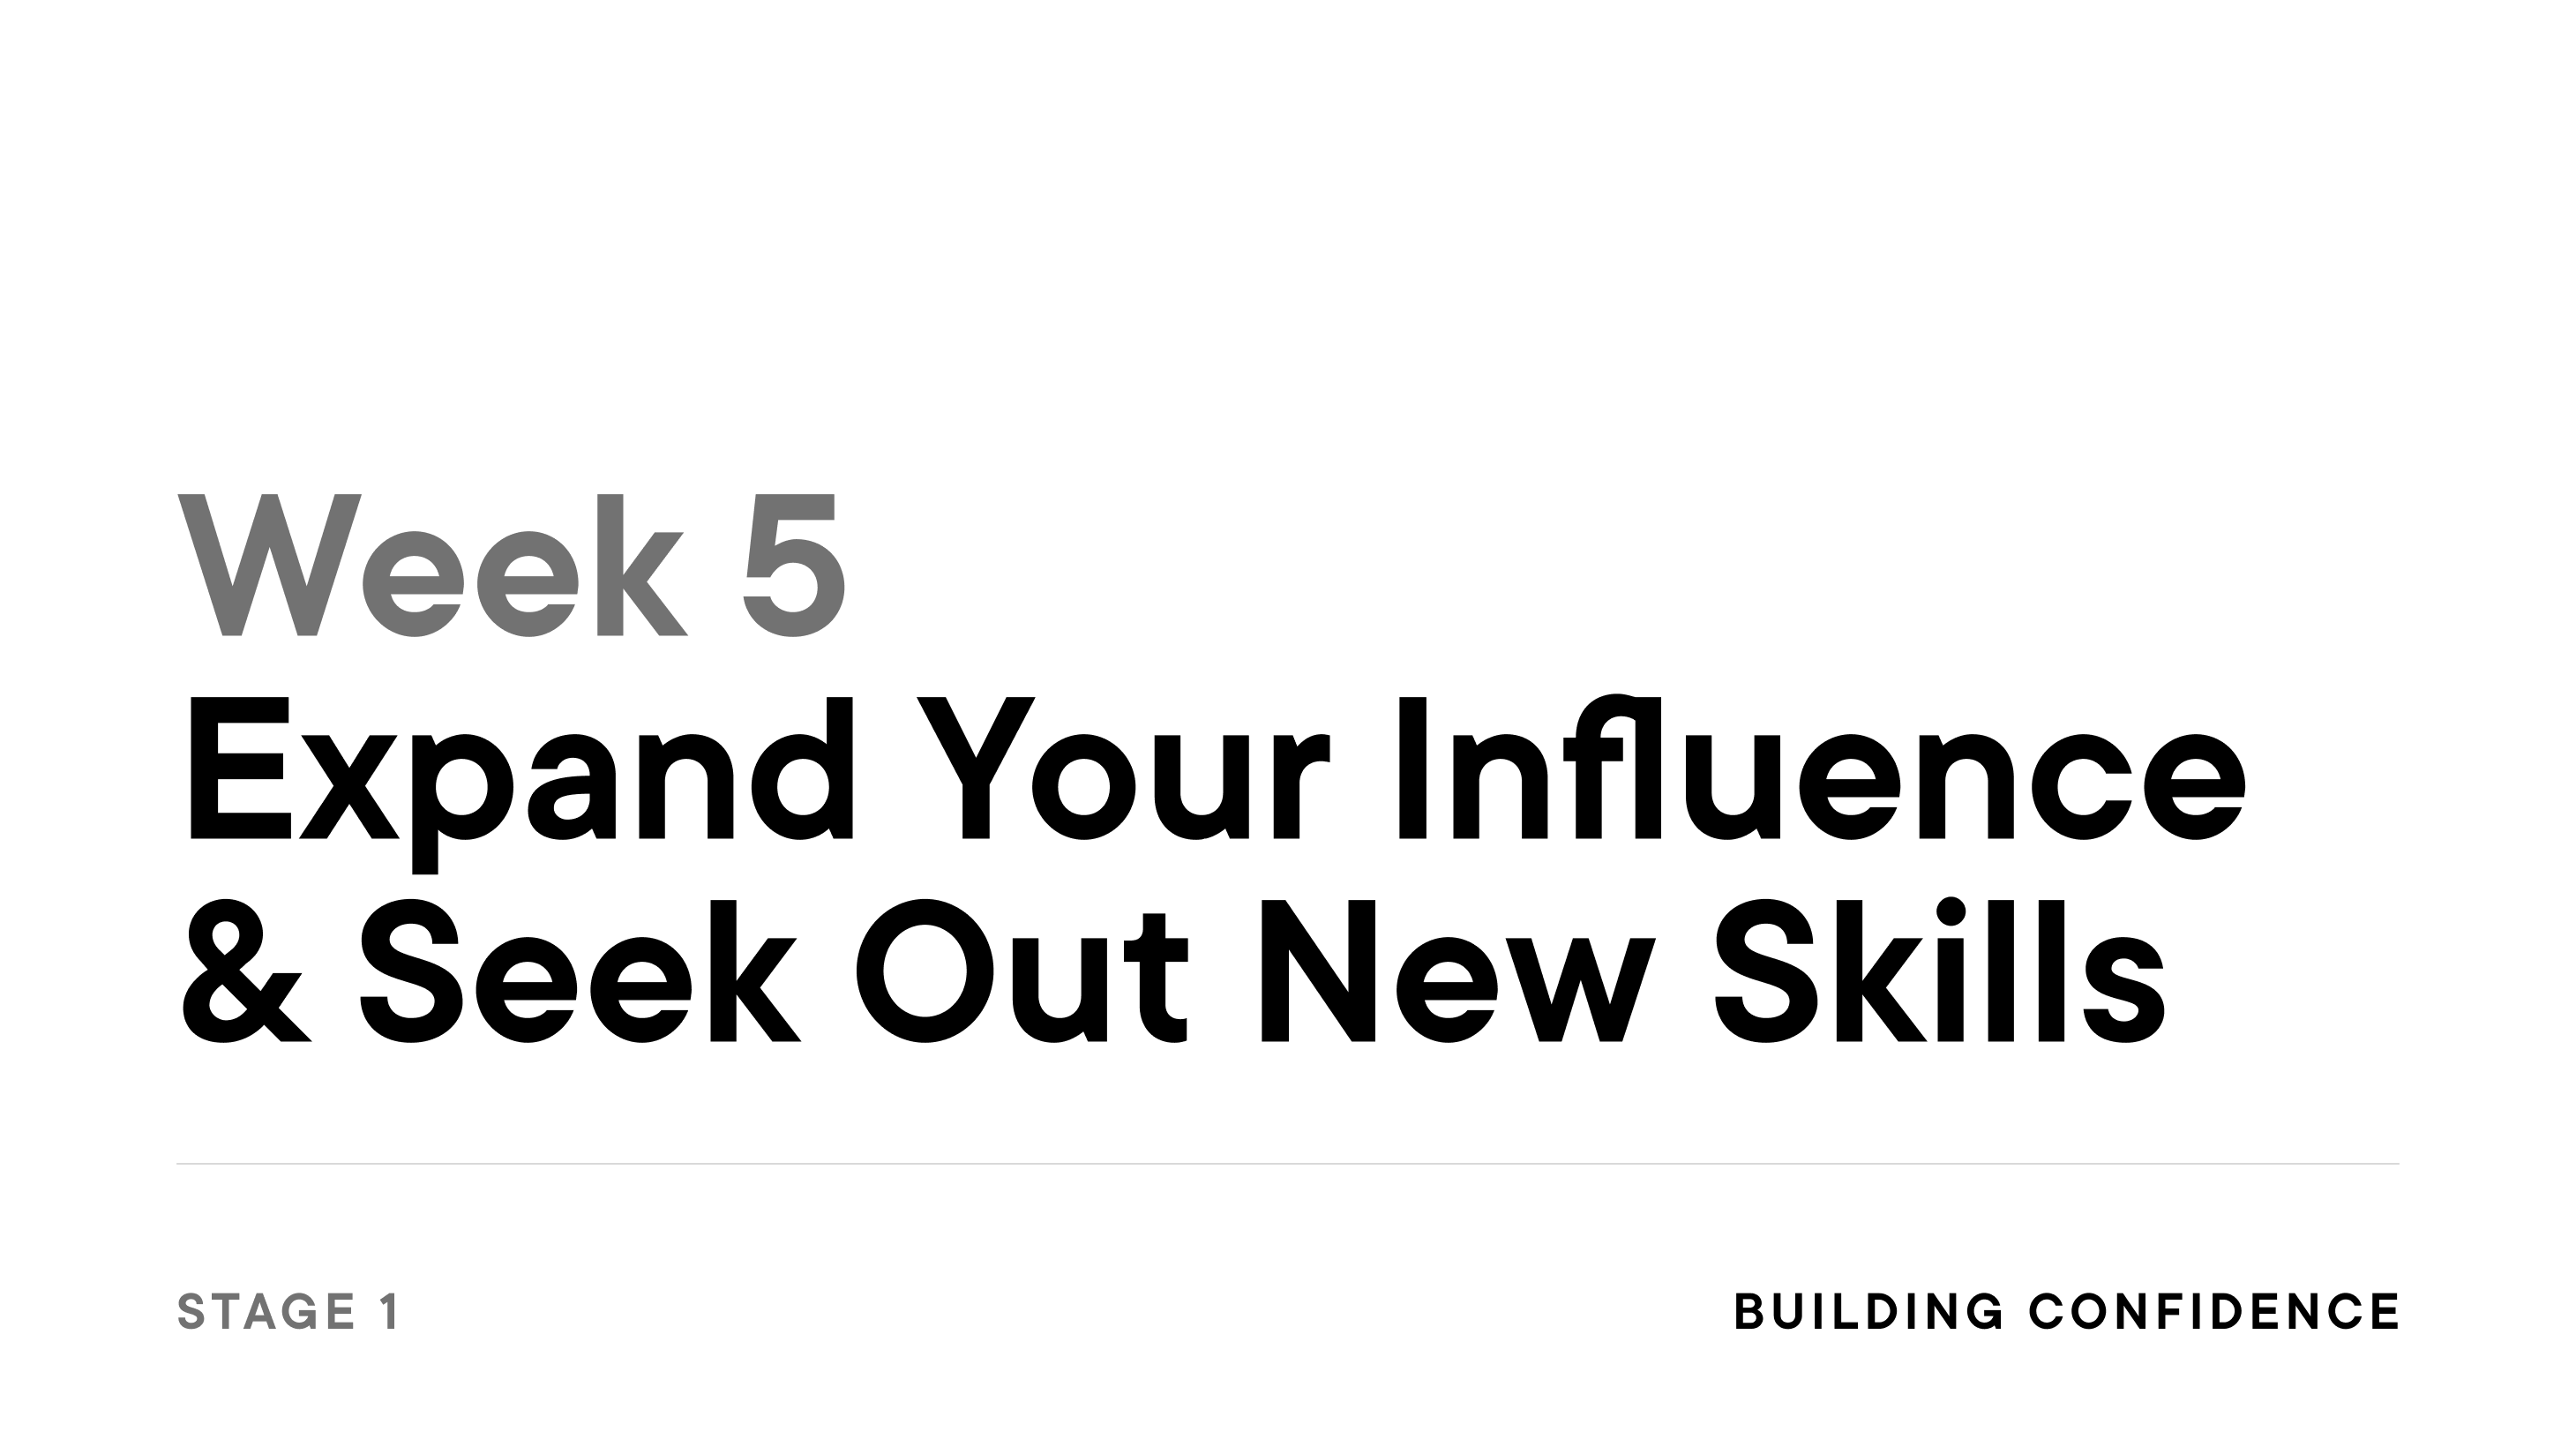 Week 5: Expand Your Influence & Seek Out New Skills